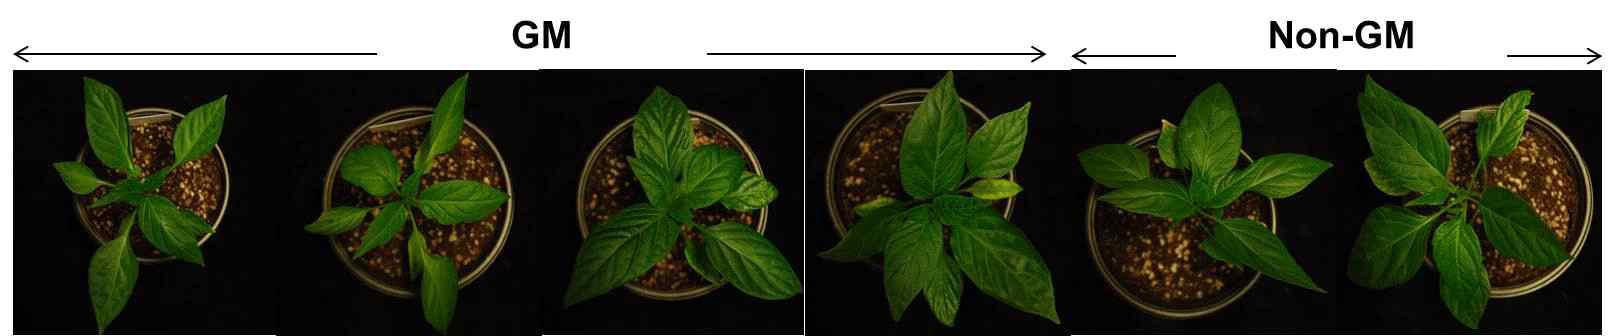 Symptoms of GM and non-GM peppers infected with CMV(7 dpi).